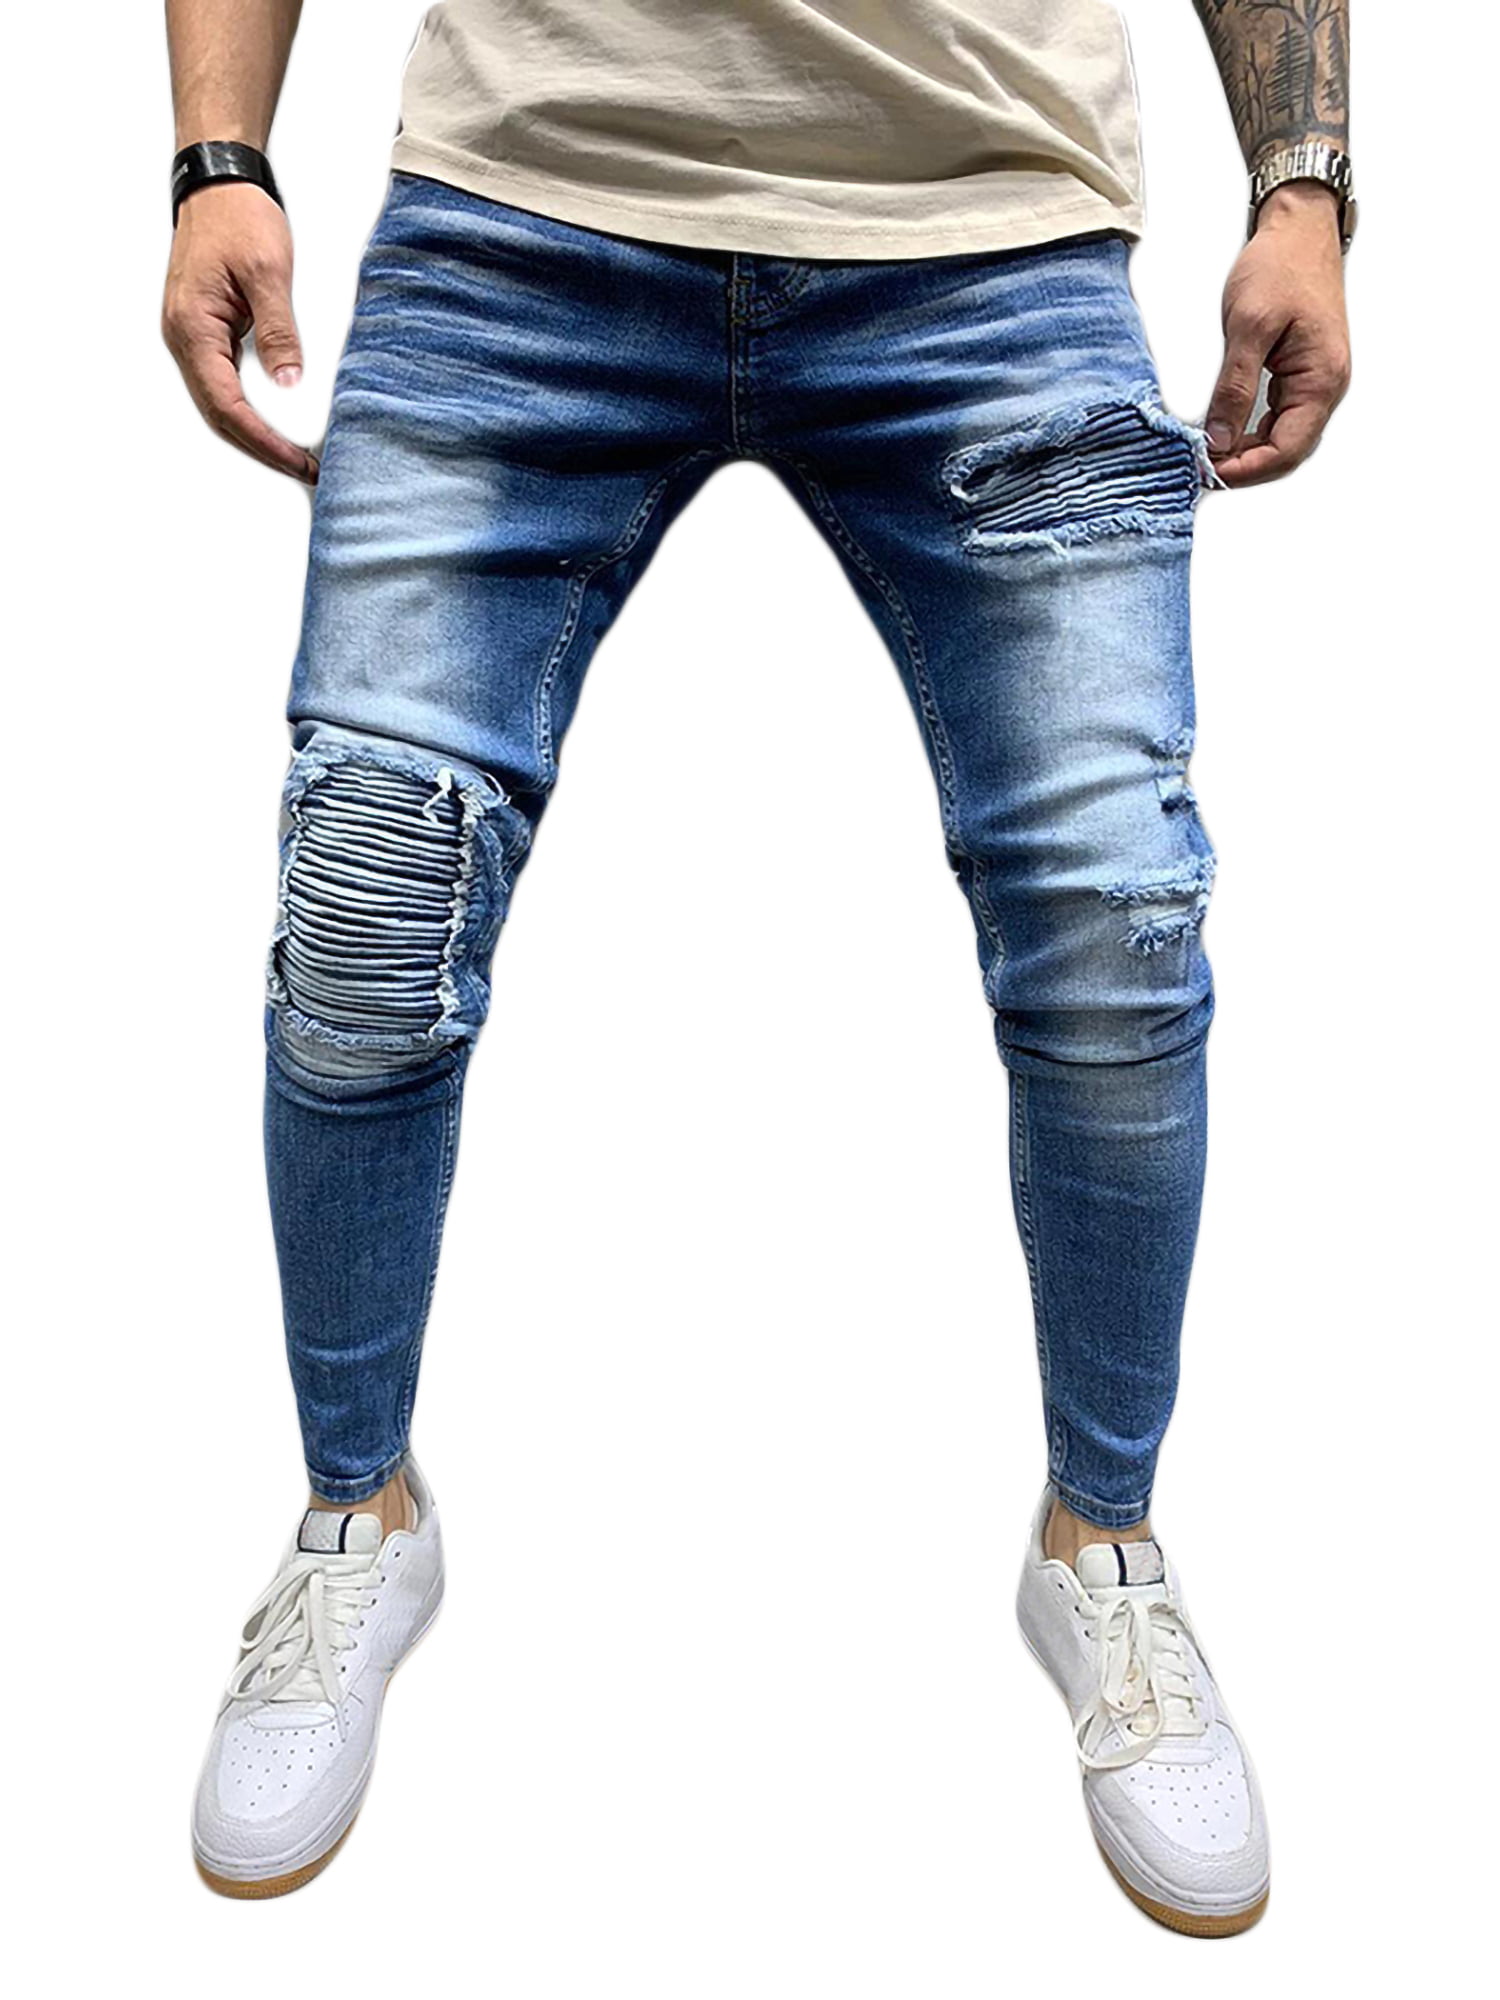 Mens Letter Stretch Jeans Ripped Denim Cargo Frayed Skinny Pants Pocket Trousers